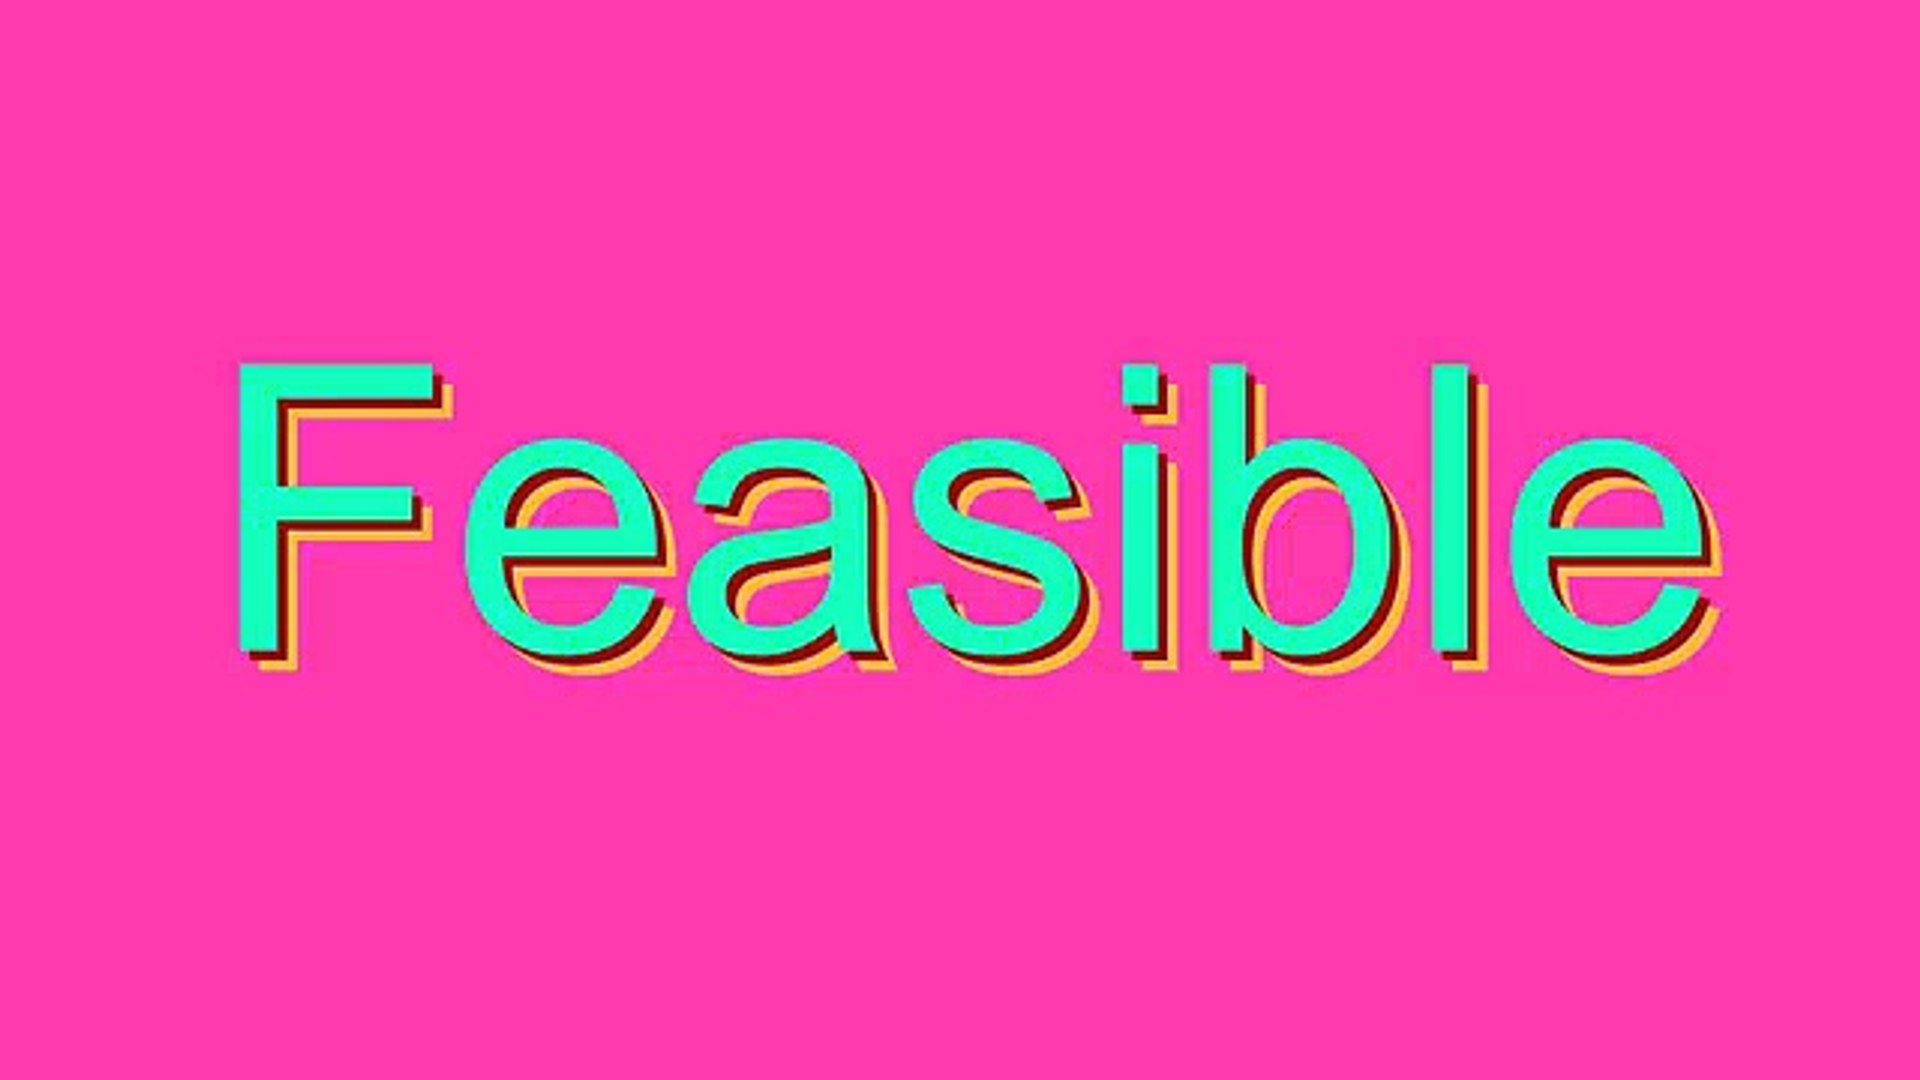 How to Pronounce Feasible